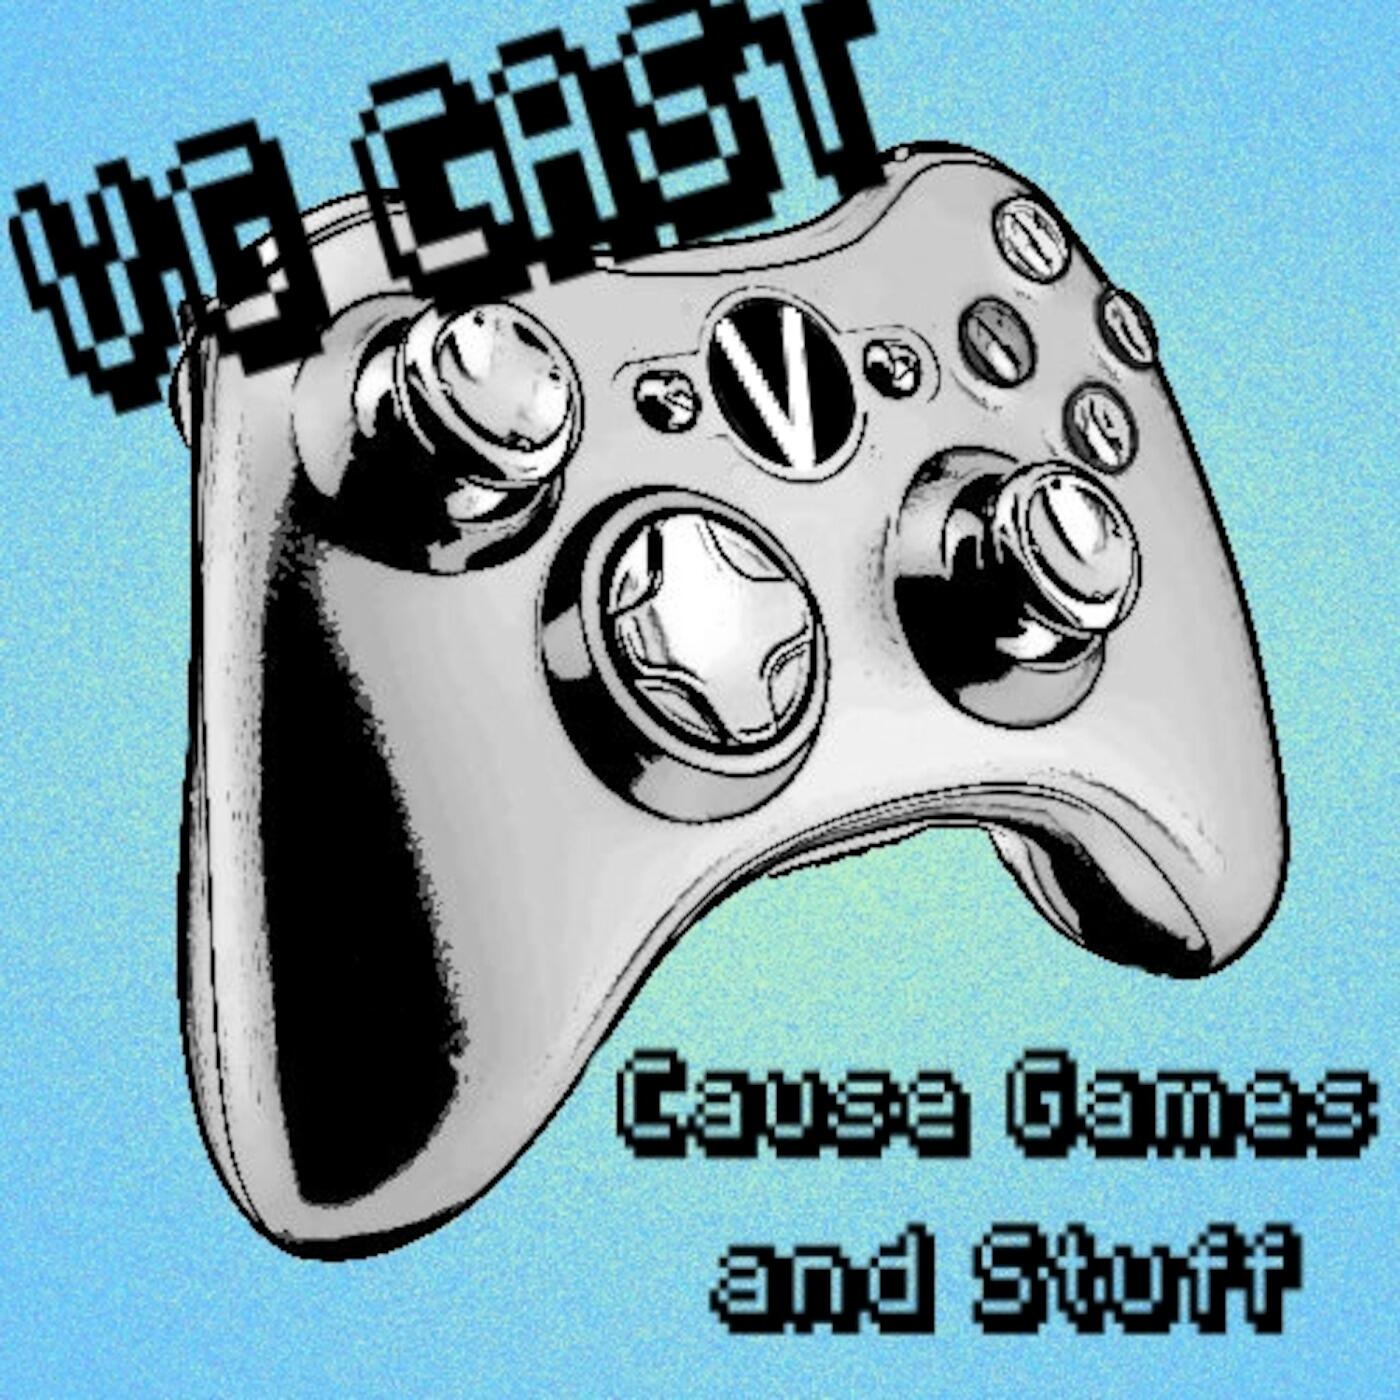 Hear games. Stuff. Talking about Video games.